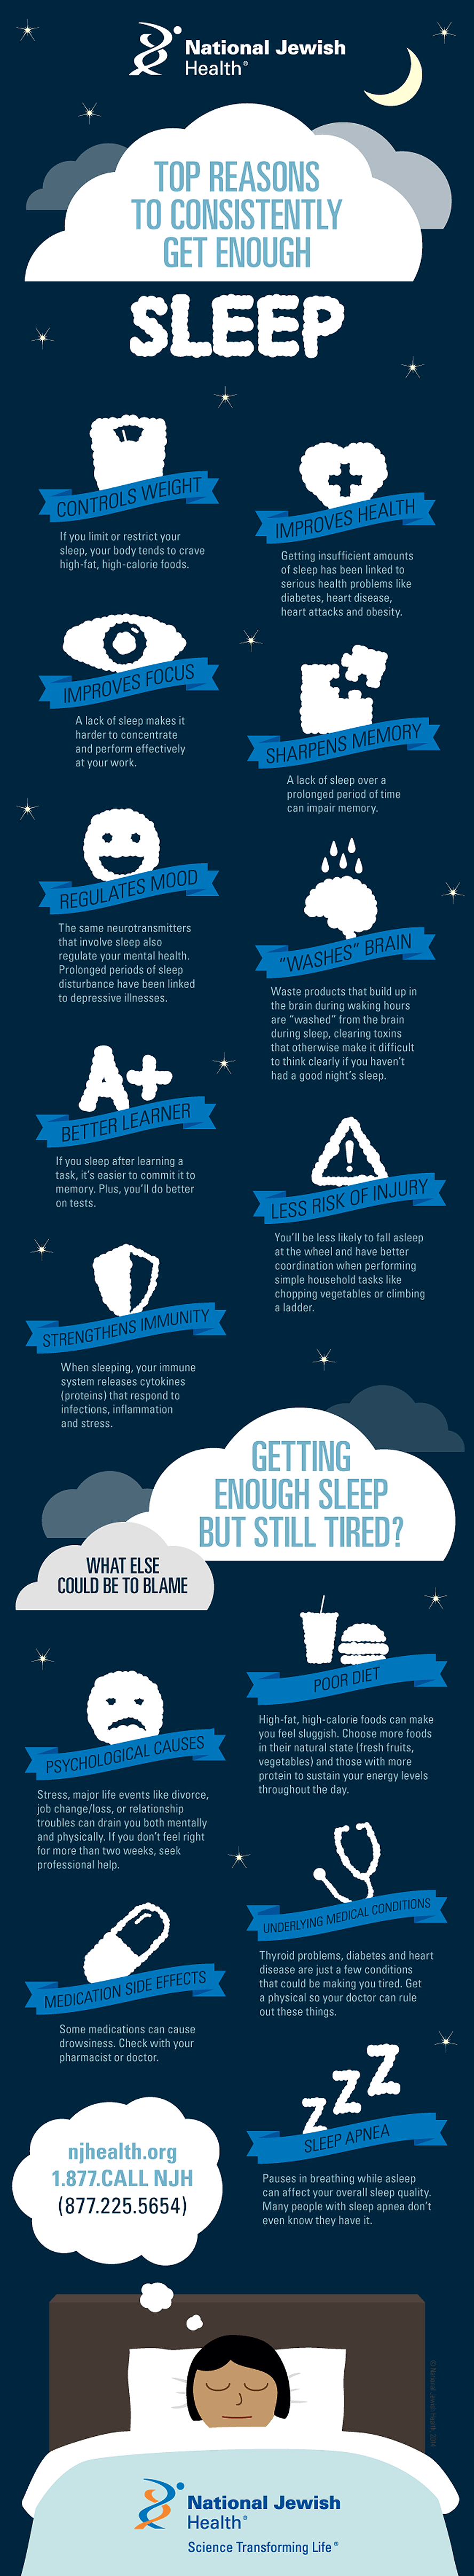 Top Reasons To Consistently Get Enough Sleep Infographic